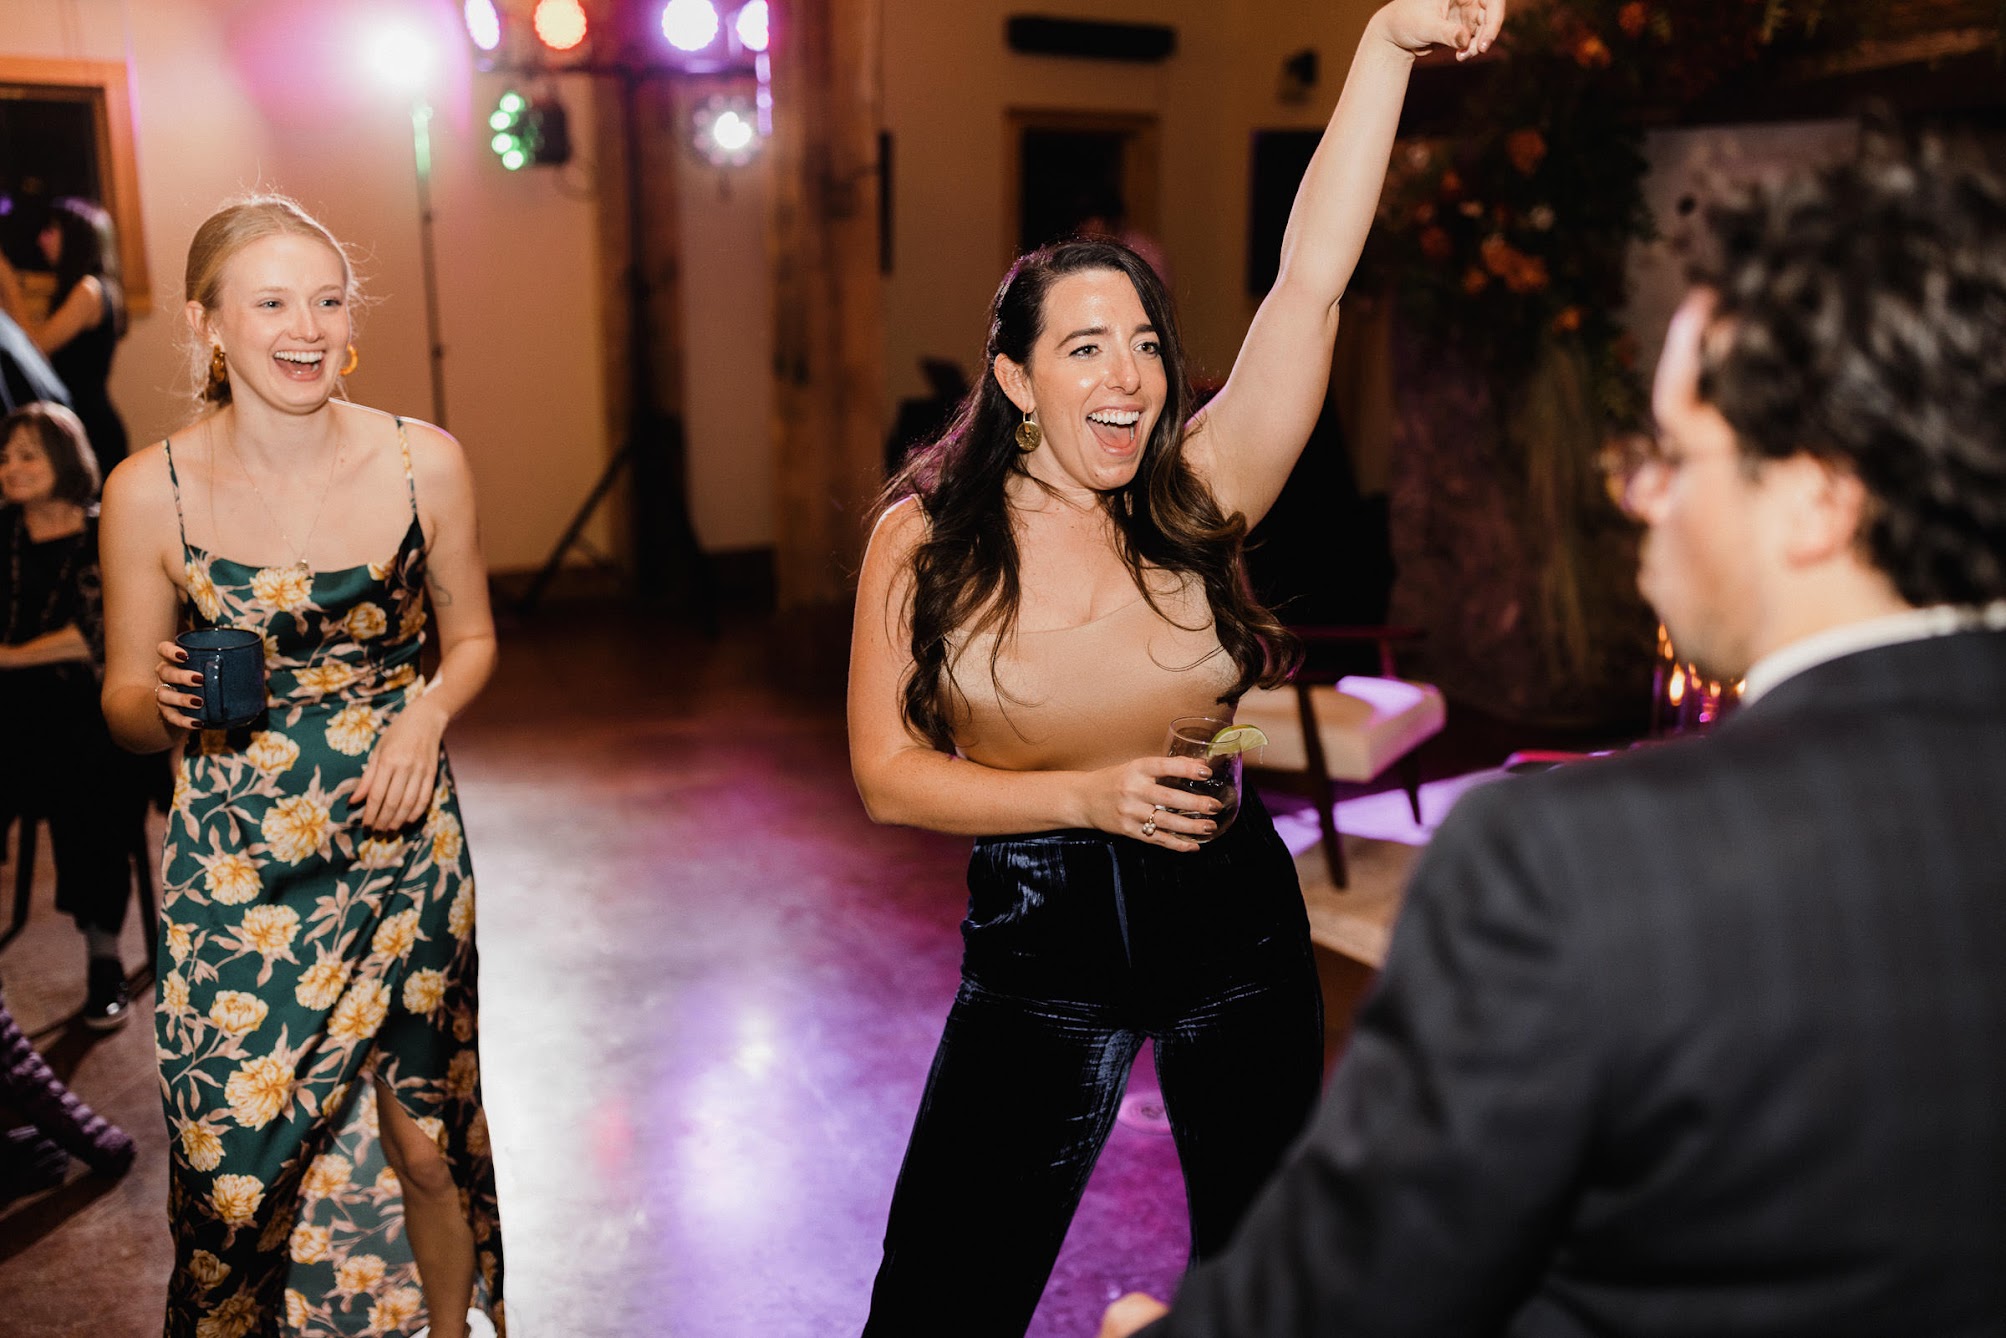 maid of honor doing a disco dance